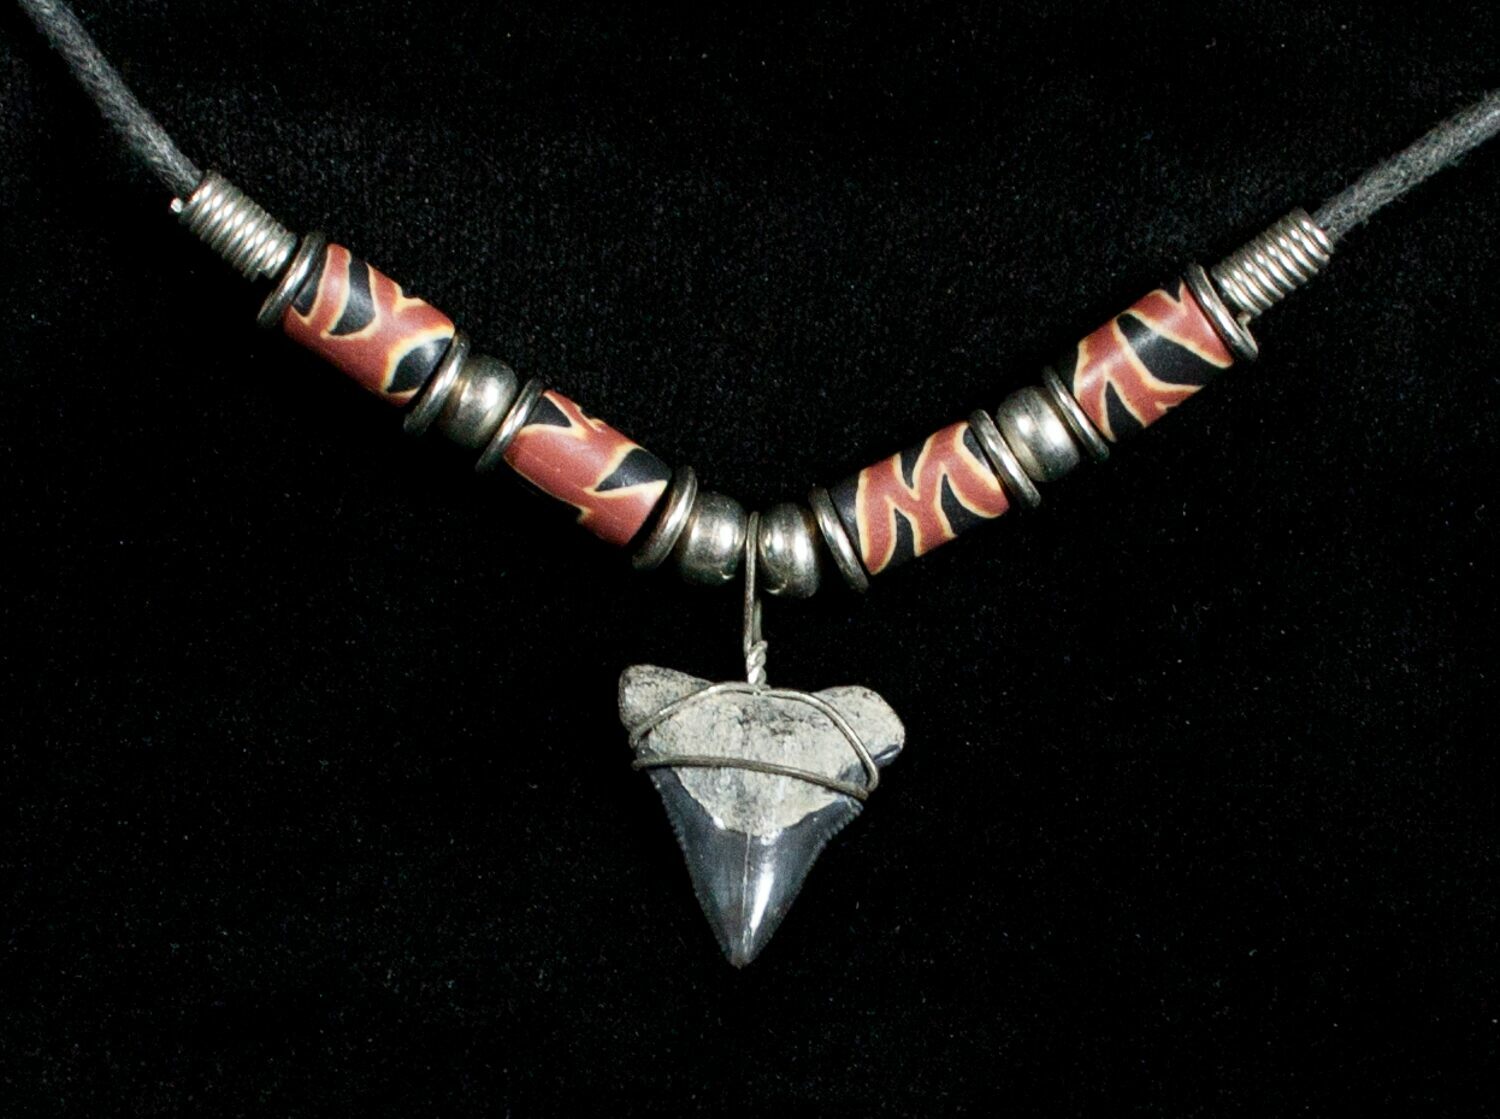 Fossil Bull Shark Tooth Necklace For Sale (#3535) - FossilEra.com